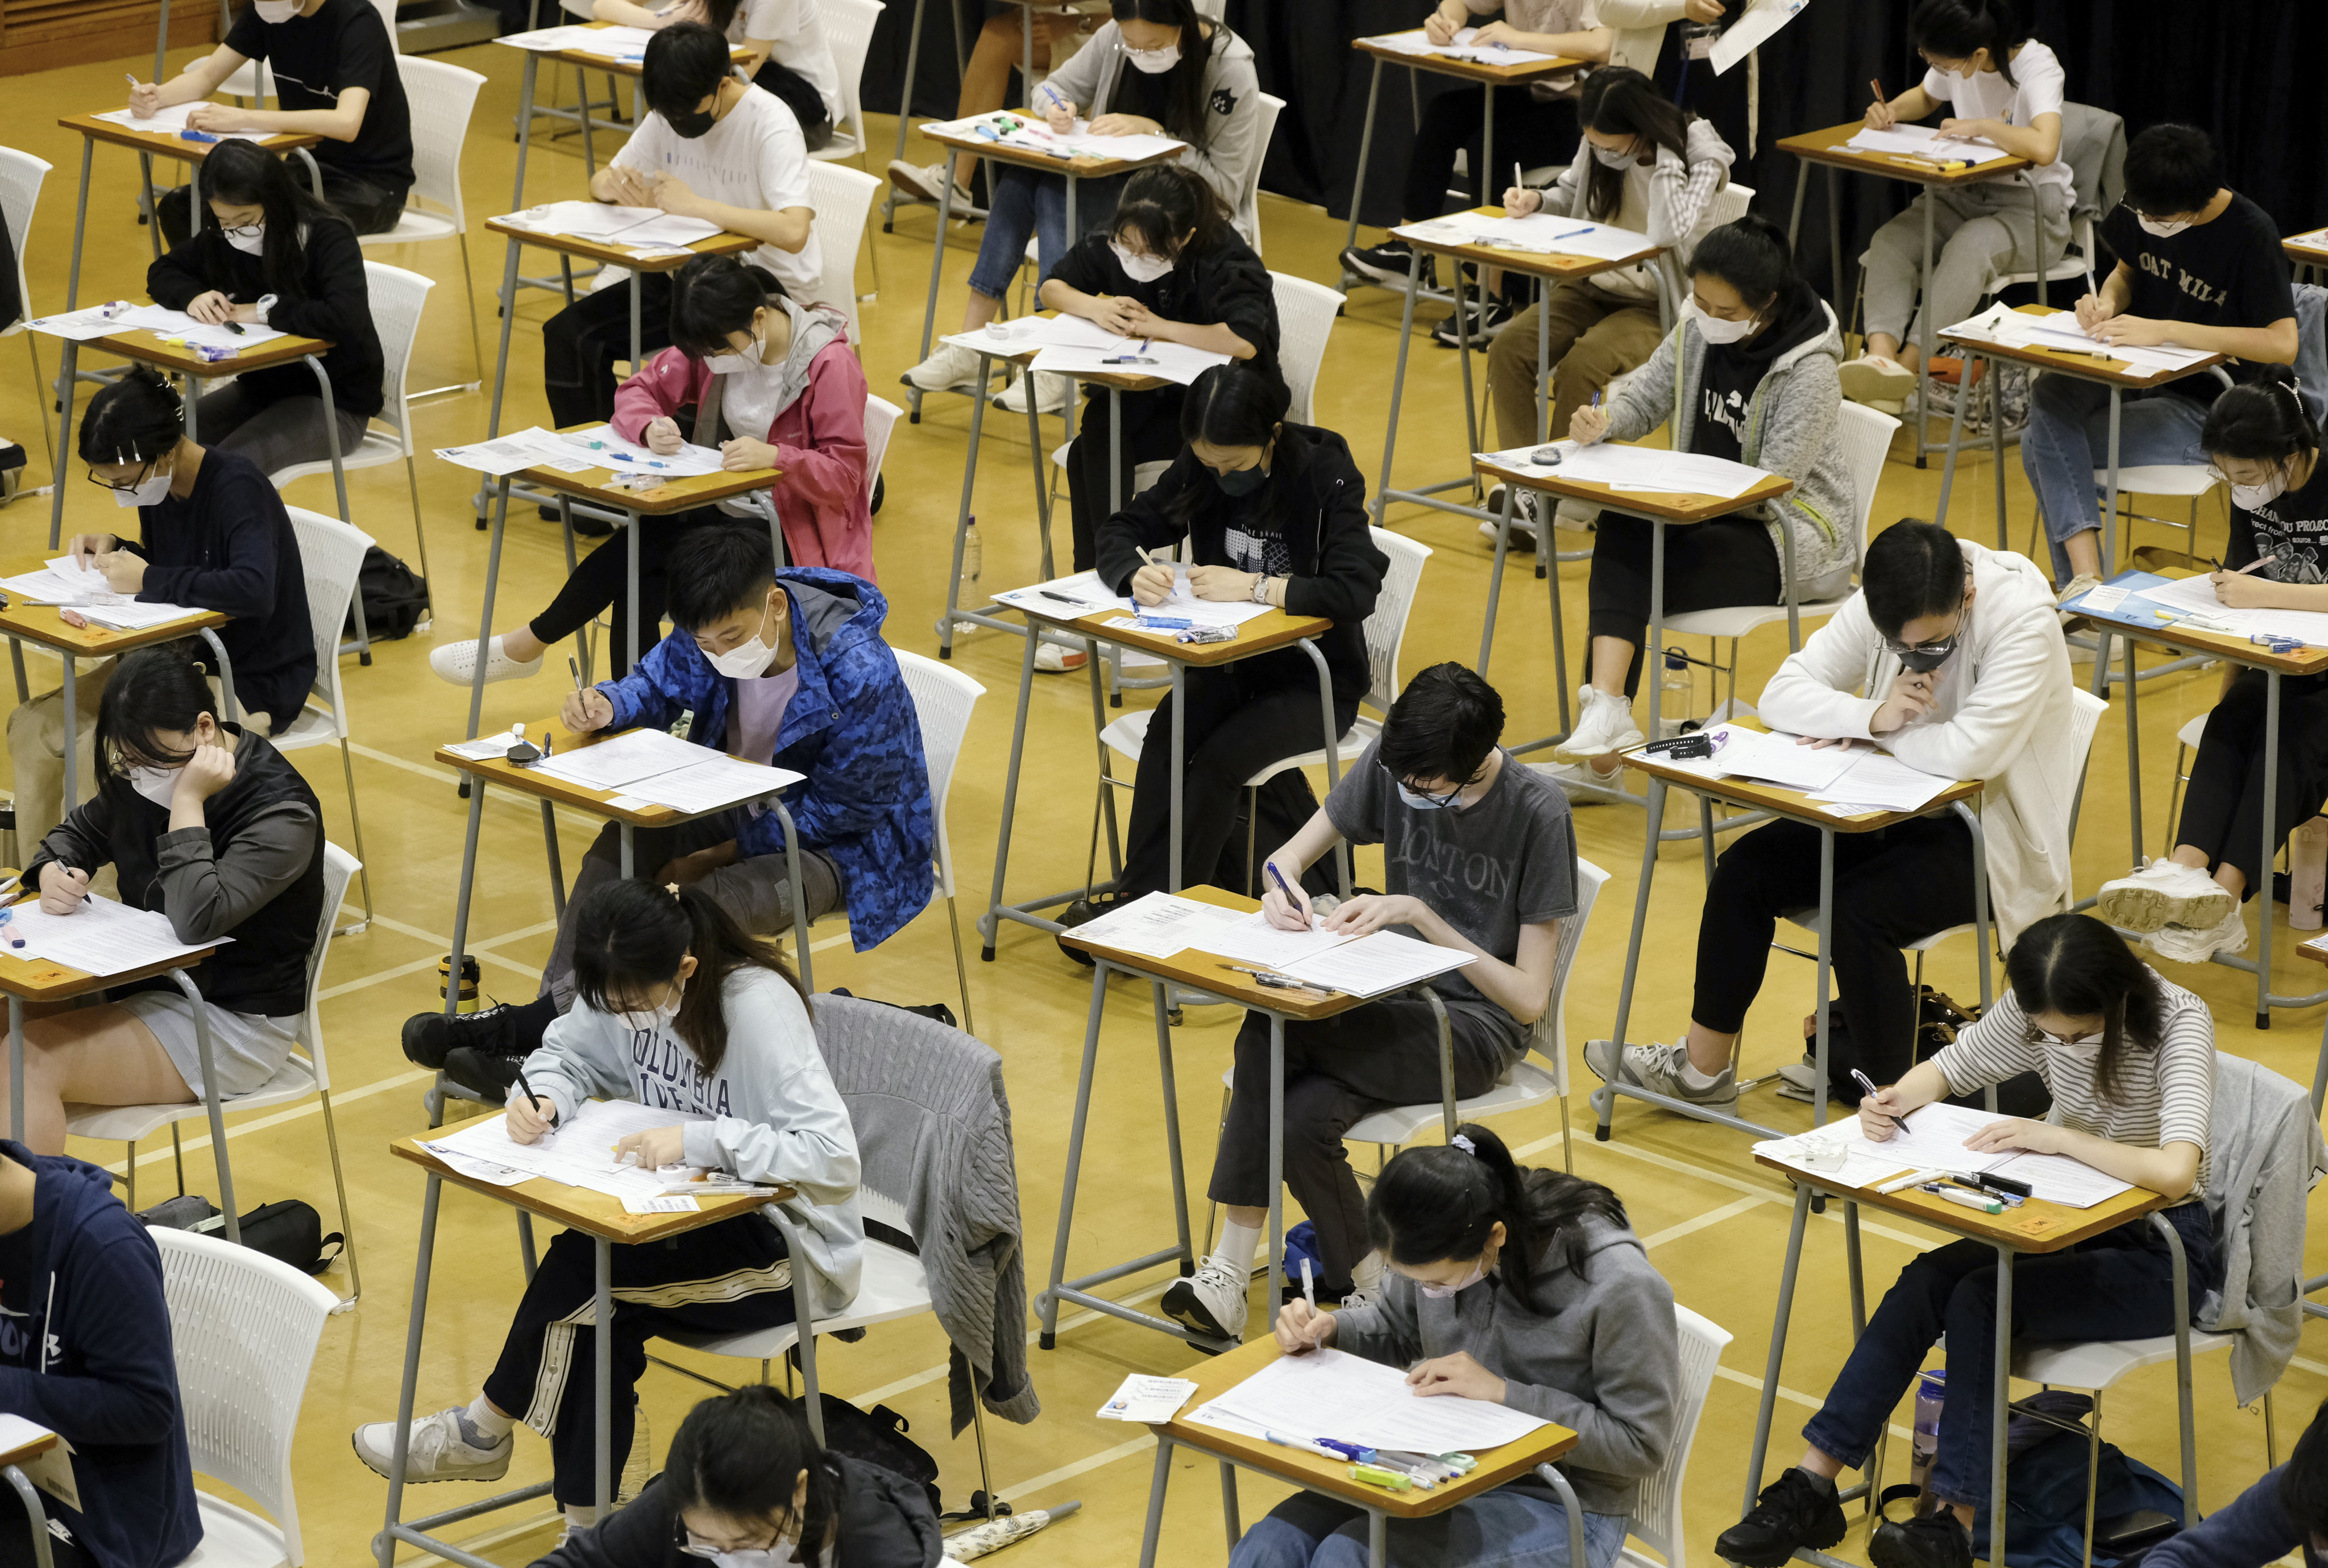 Pupils take the DSE exams at HKUGA College in Aberdeen. The tests will end on May 18. Photo: Handout